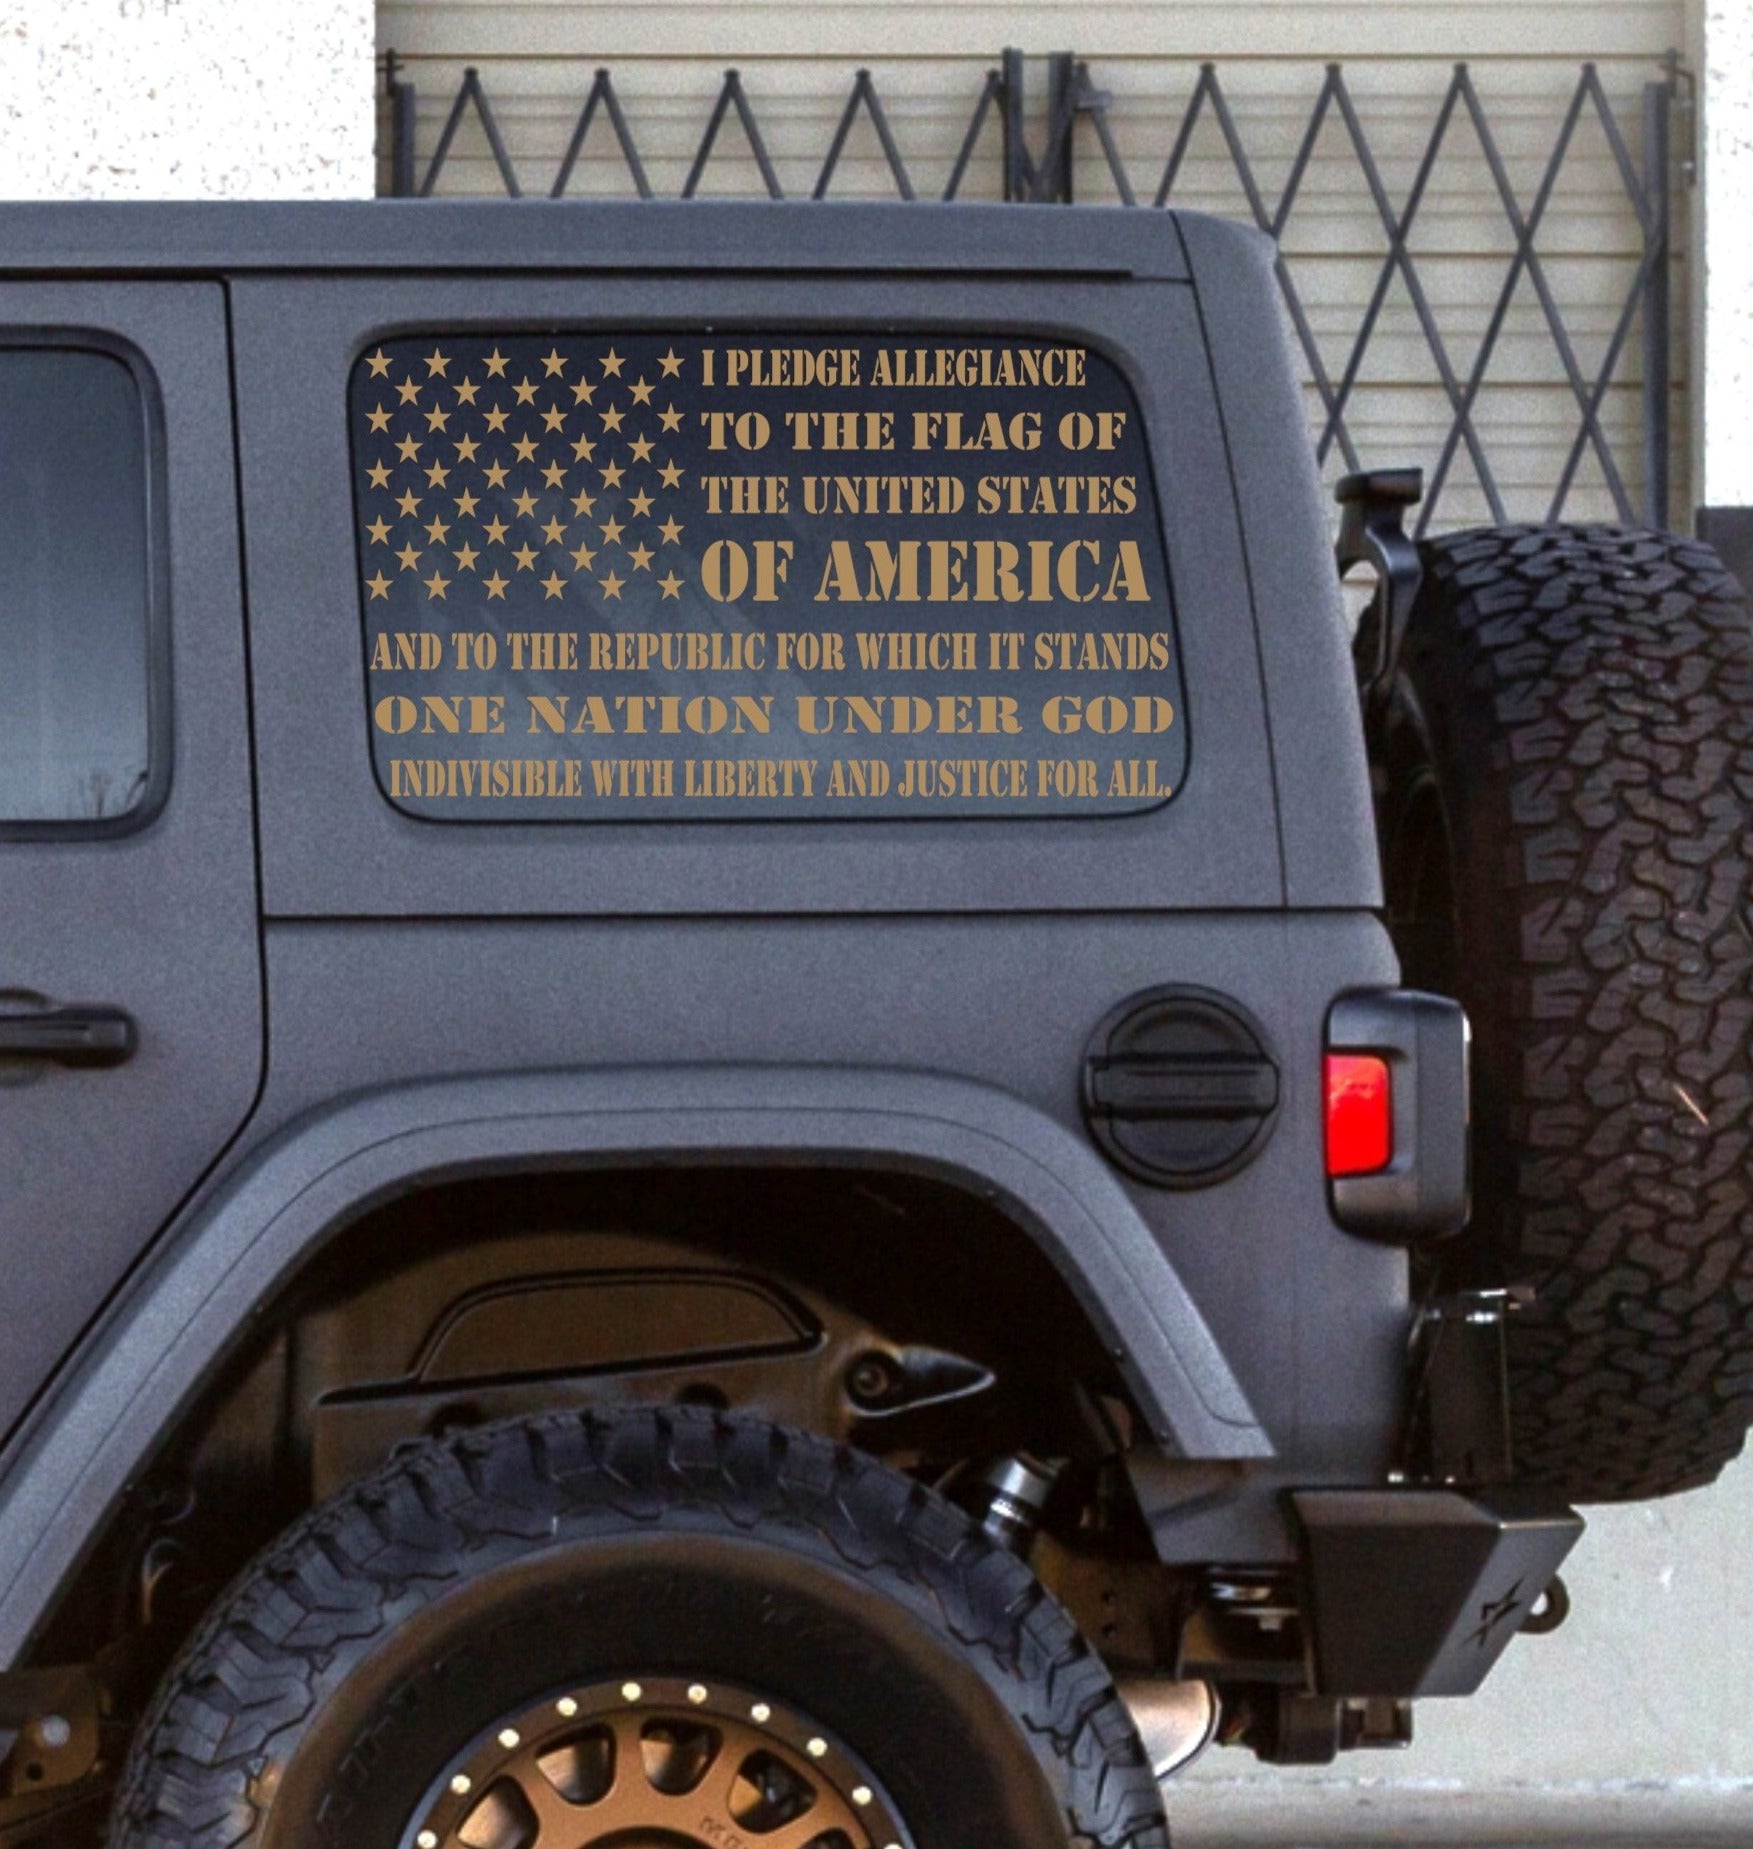 Jeep Wrangler JL JK Decals "WE THE PEOPLE" Preamble to the Constitution American Flag Stickers (2/4-Door Rear Side Windows)